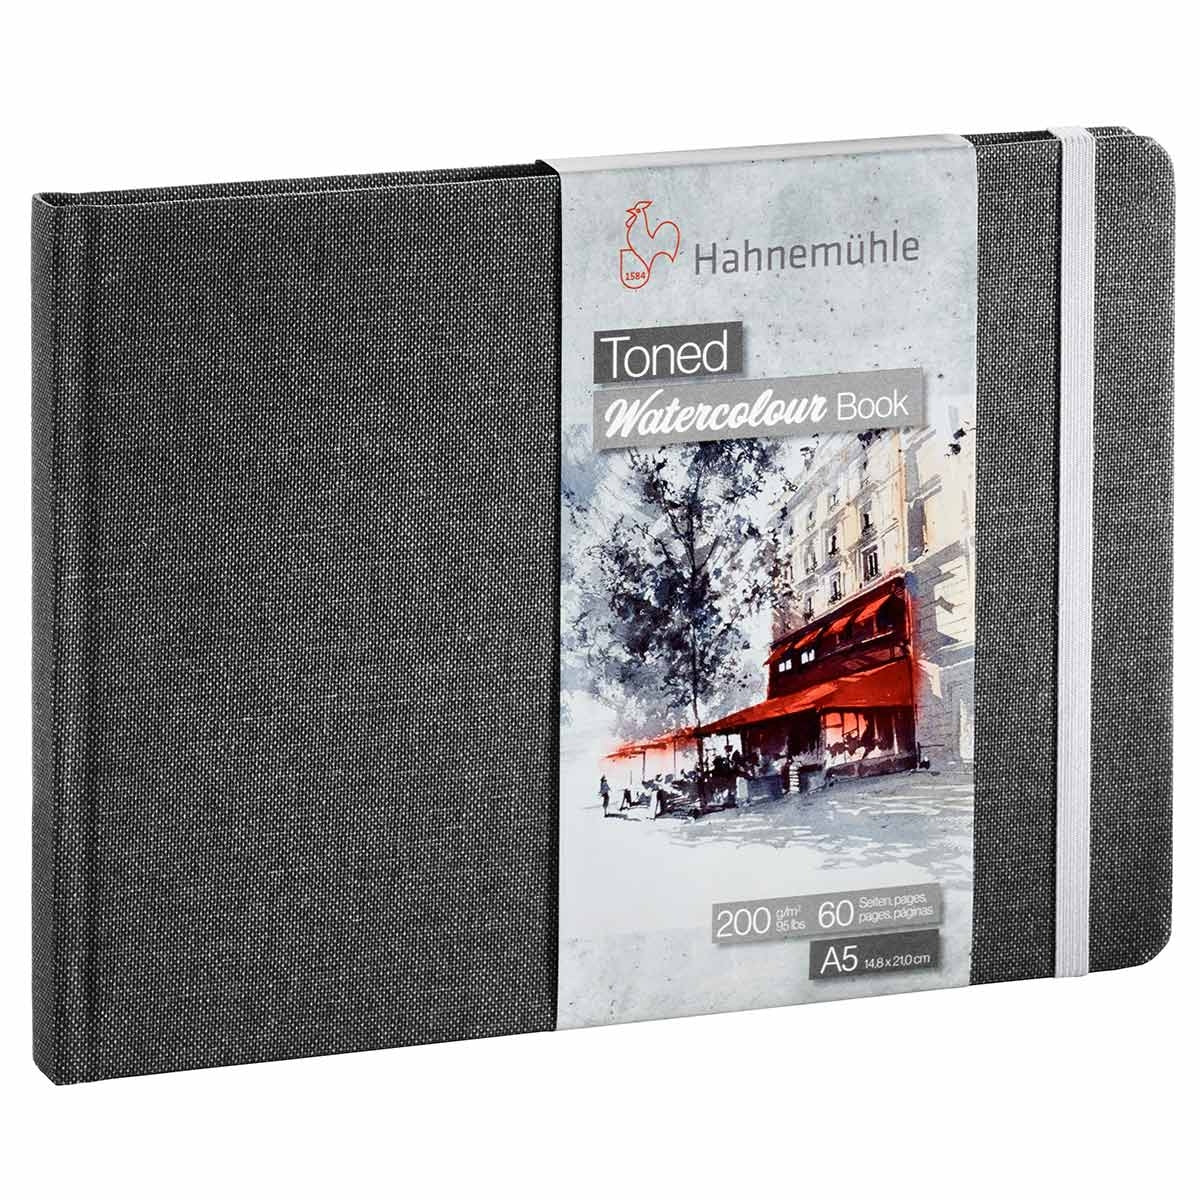 Hahnemuhle - Toned Watercolour Books - Grey A5